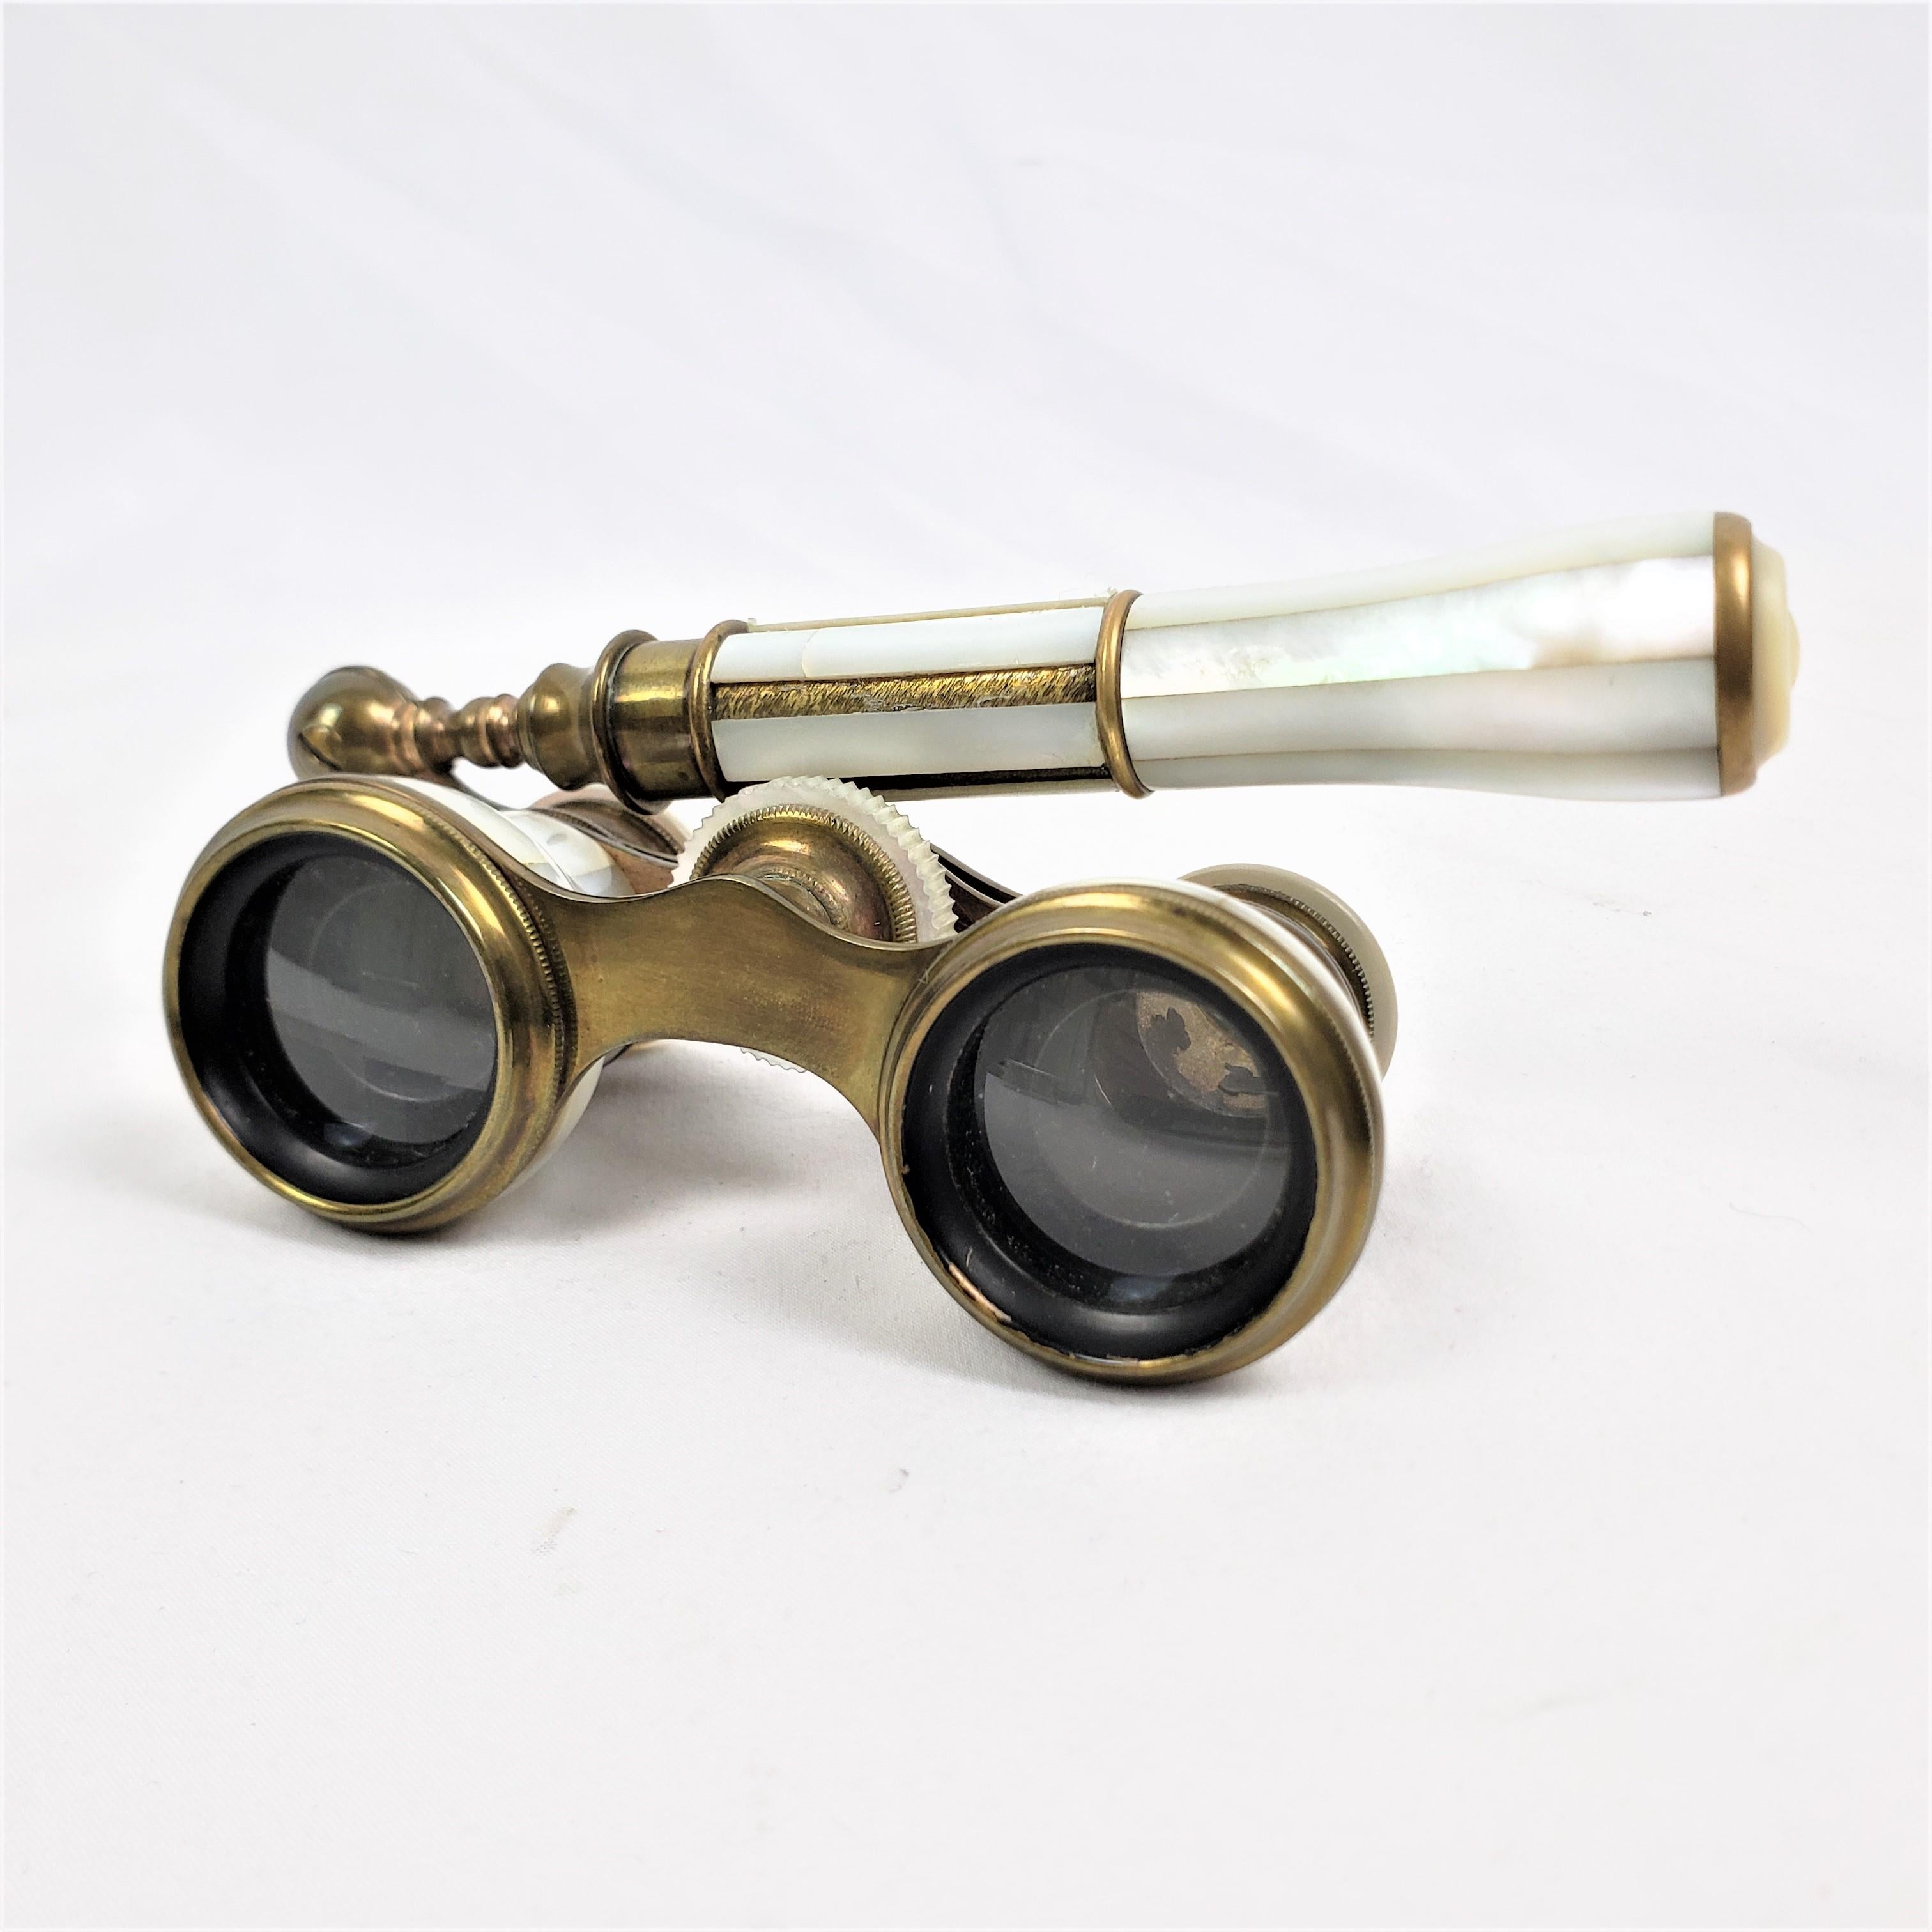 This pair of antique lorgnette opera glasses were made by LeRoy of France in approximately 1880 in the period Victorian style. These binoculars are composed of brass with very good optical glass and decorated with mother of pearl. These opera